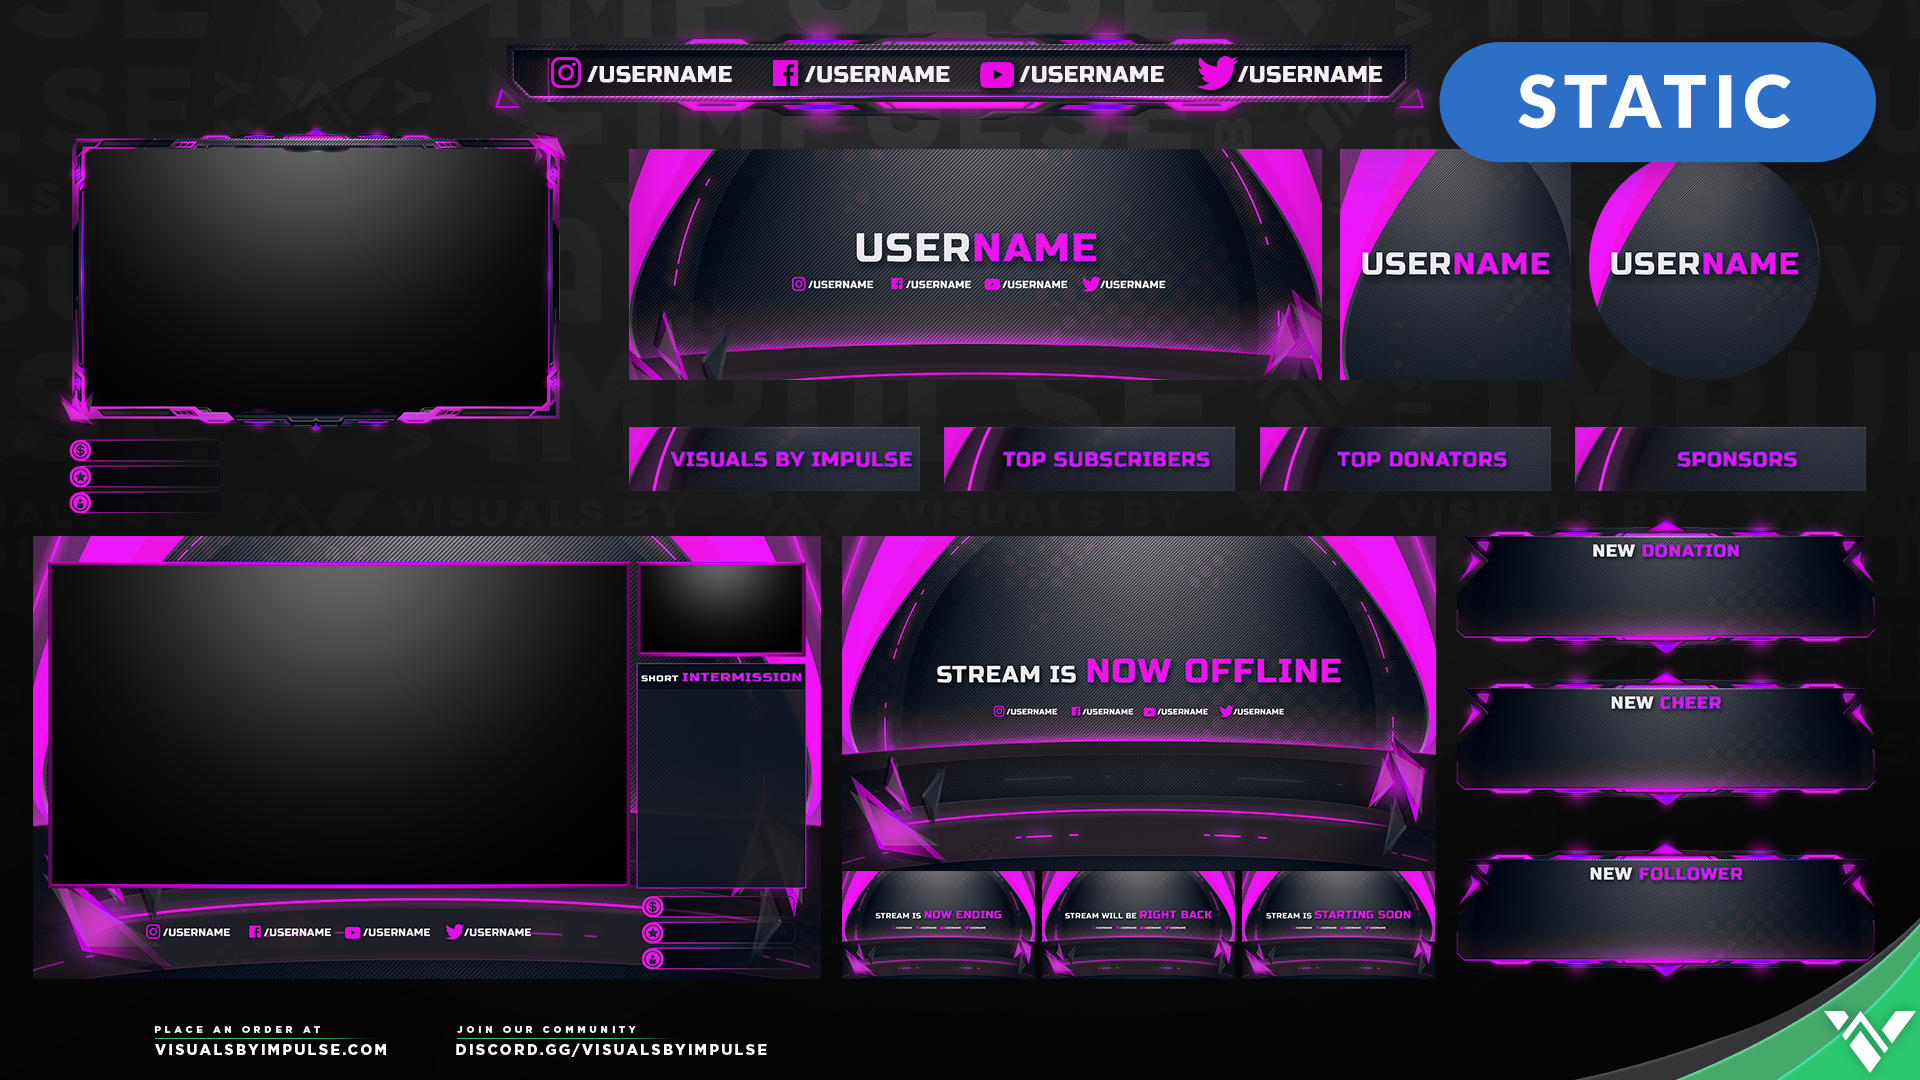 'Corelite' Stream Overlays - Graphics for Twitch and Mixer ... - 1920 x 1080 png 2211kB